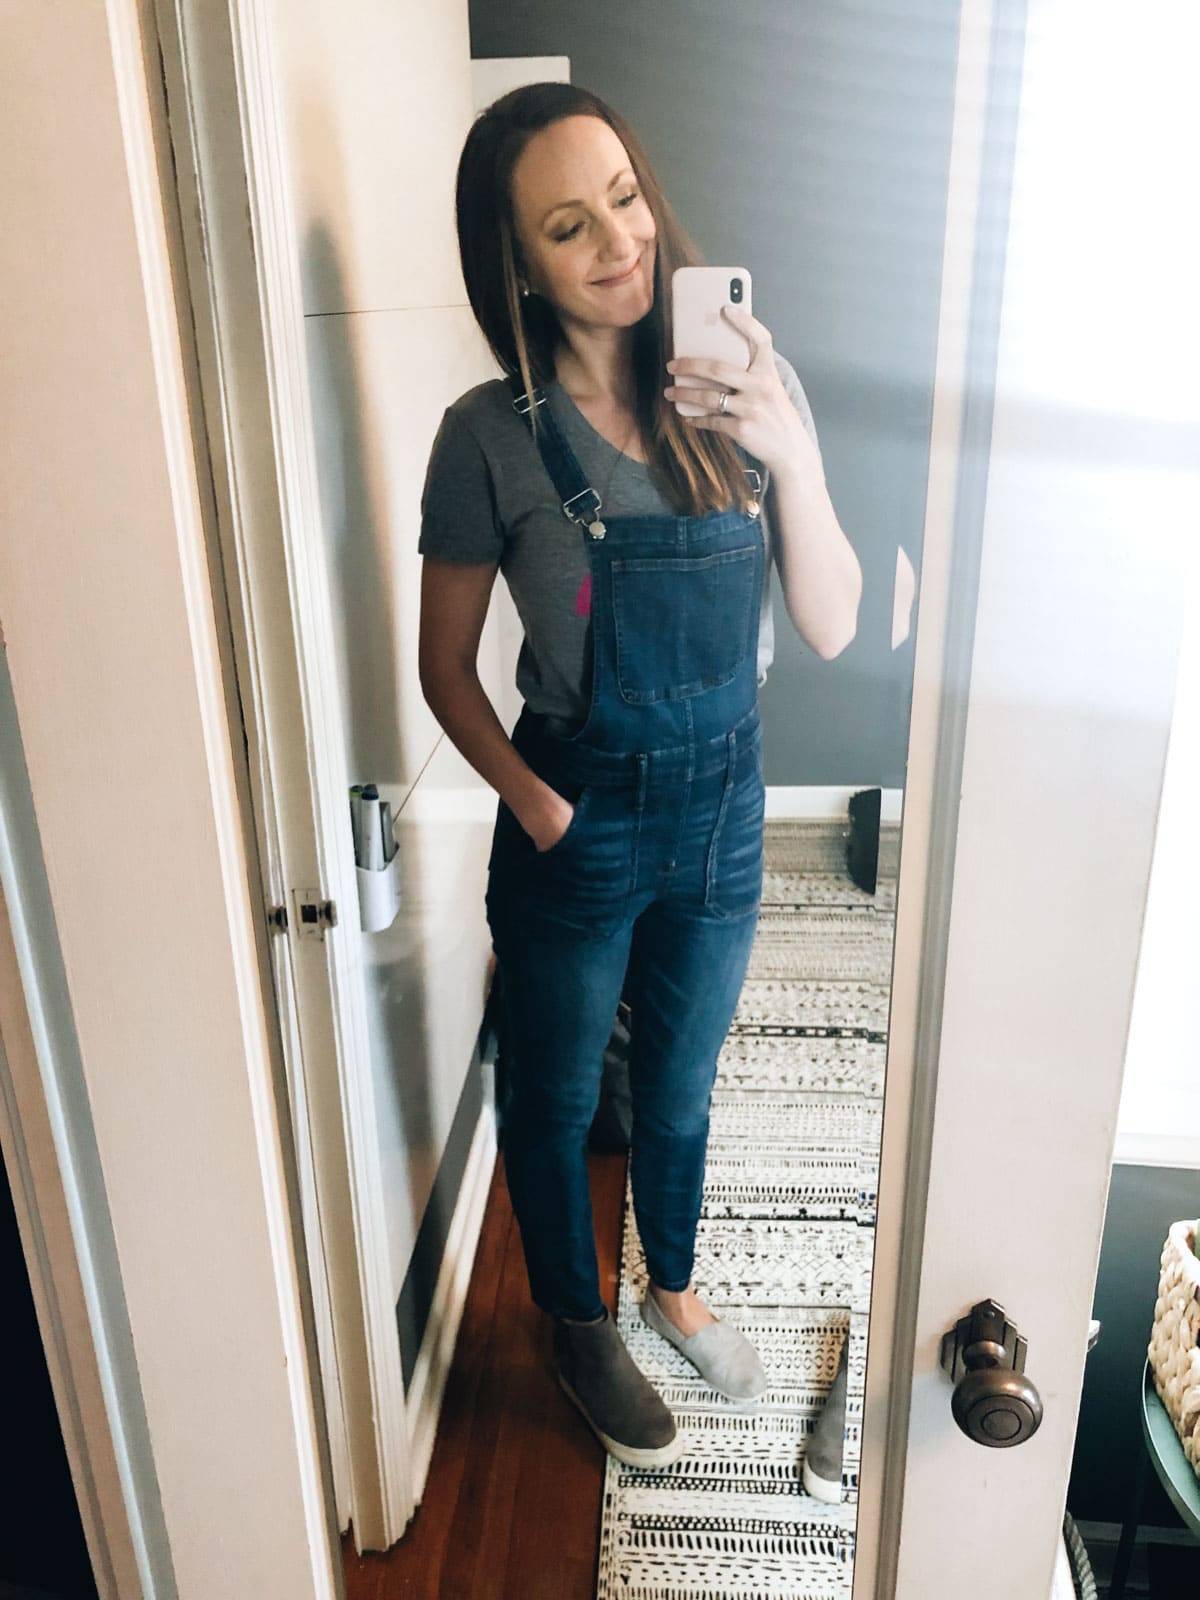 A lady with overalls smiling and taking a selfie.